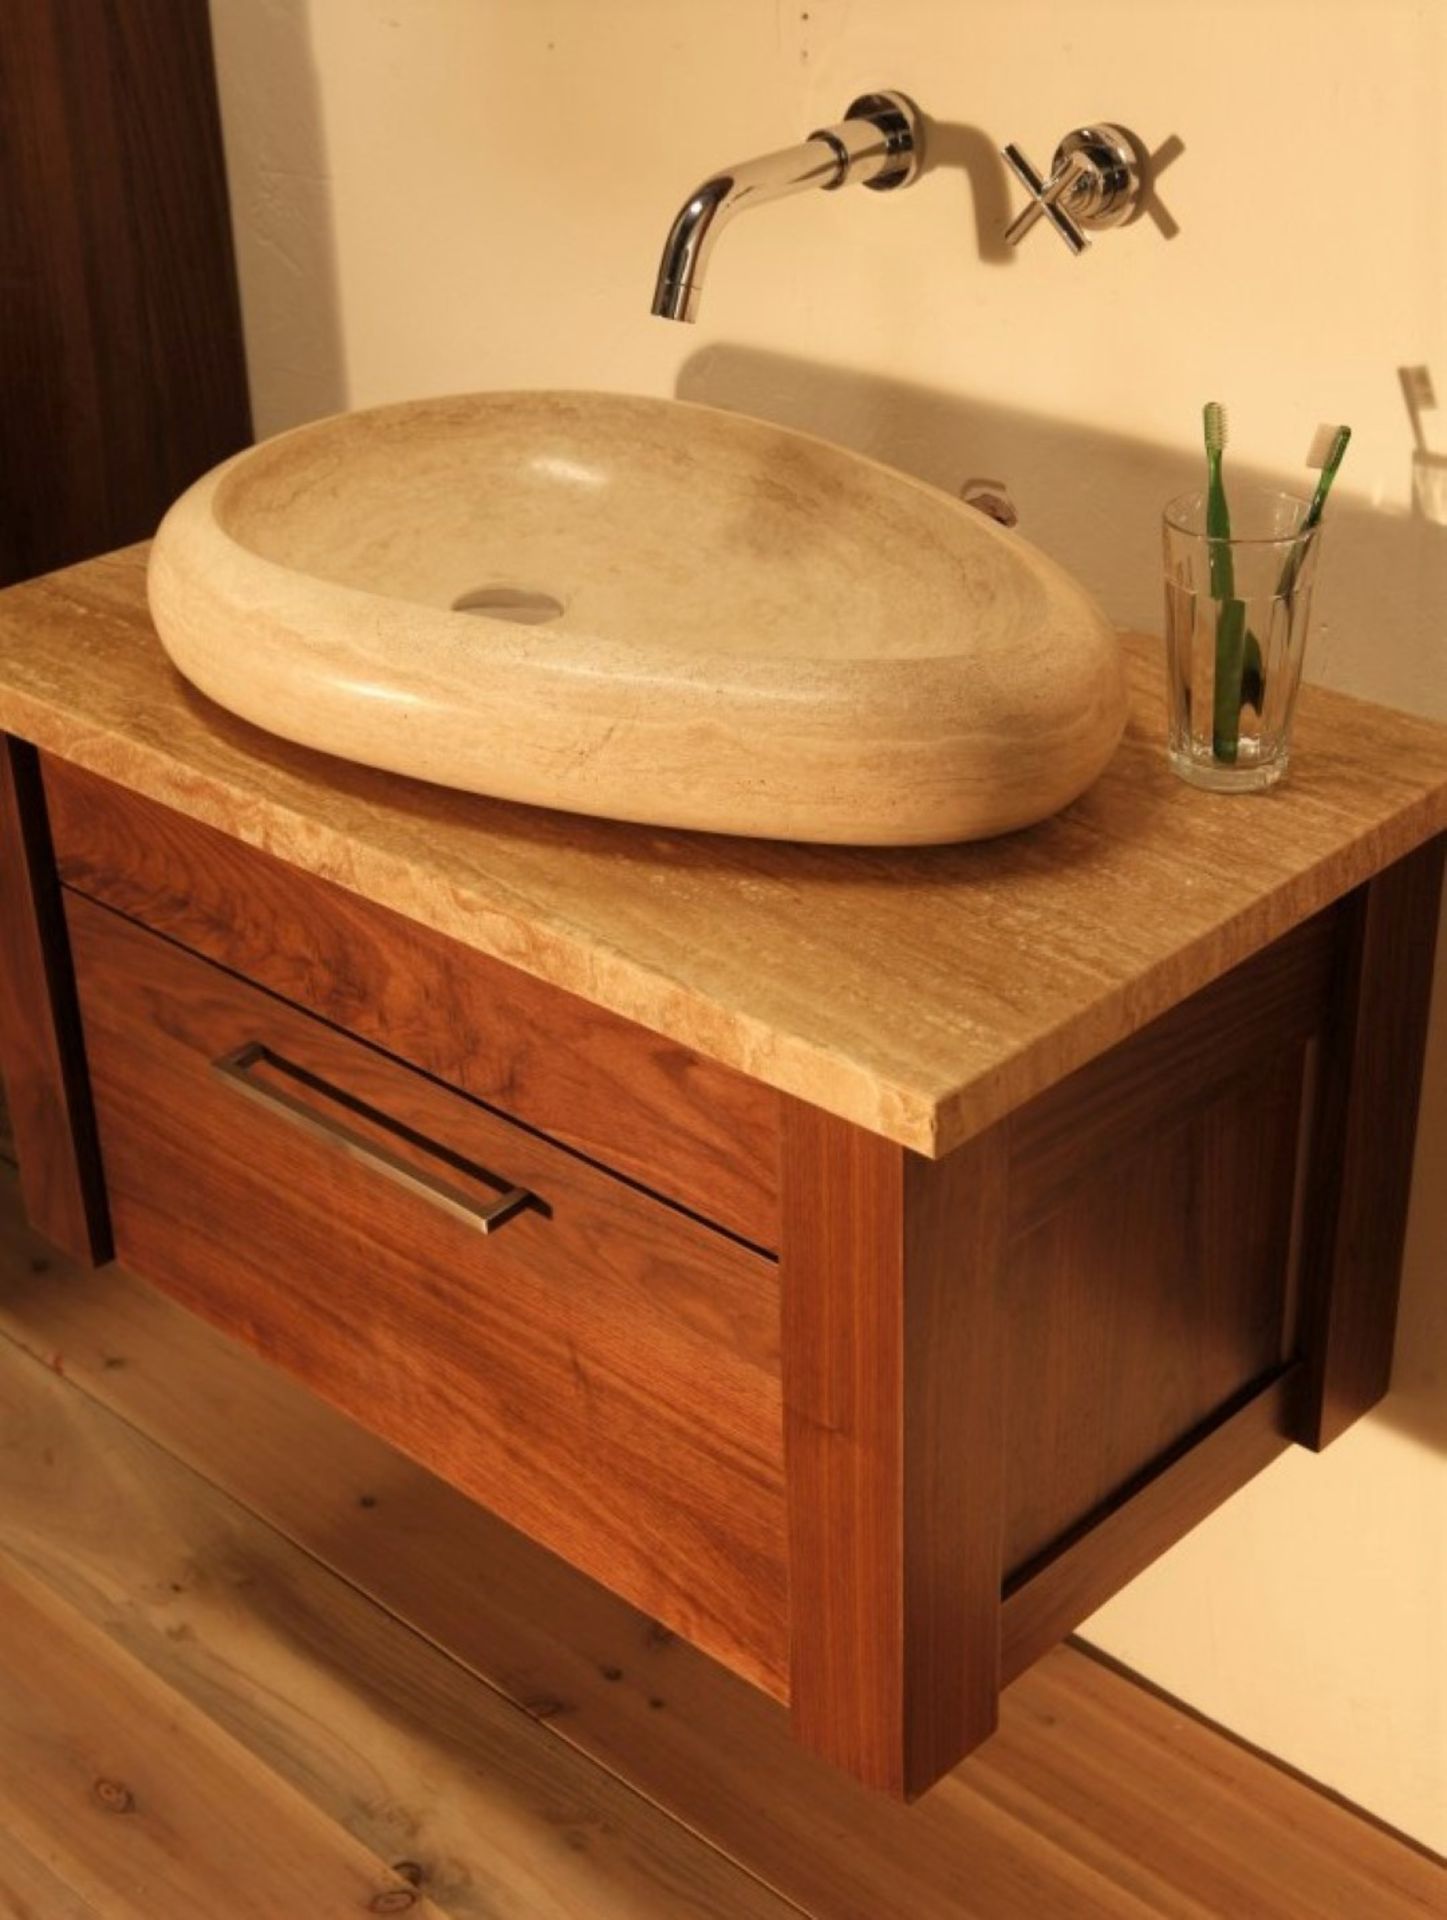 1 x Stonearth 'Venice' Wall Mounted 760mm Washstand - American Solid Walnut - Original RRP £1,169 - Image 7 of 10